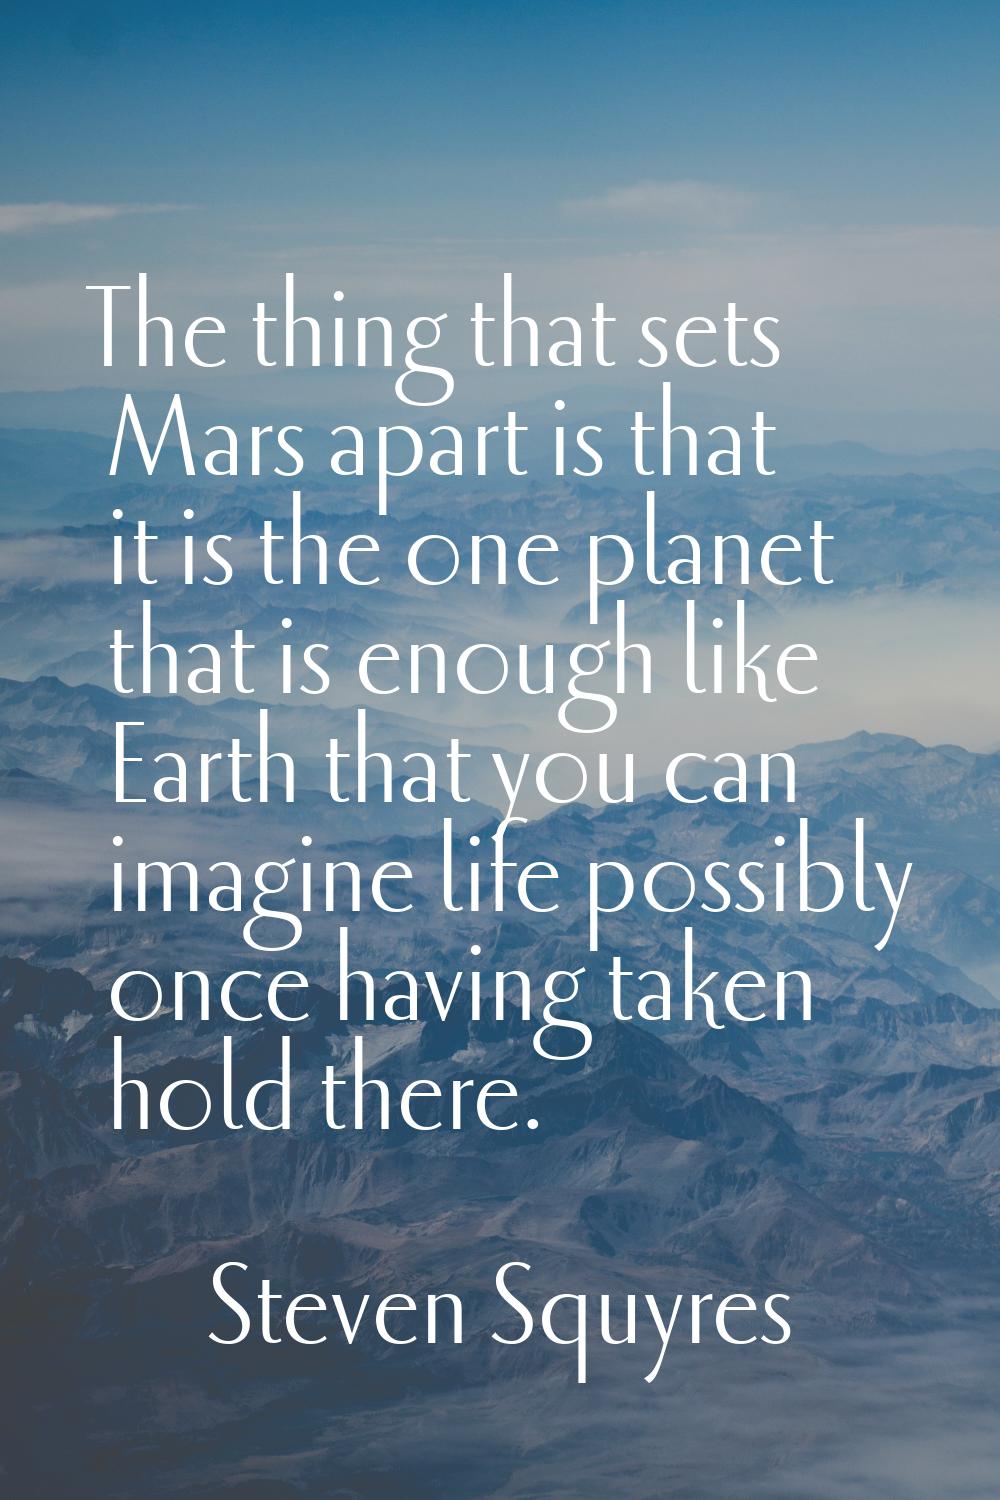 The thing that sets Mars apart is that it is the one planet that is enough like Earth that you can 